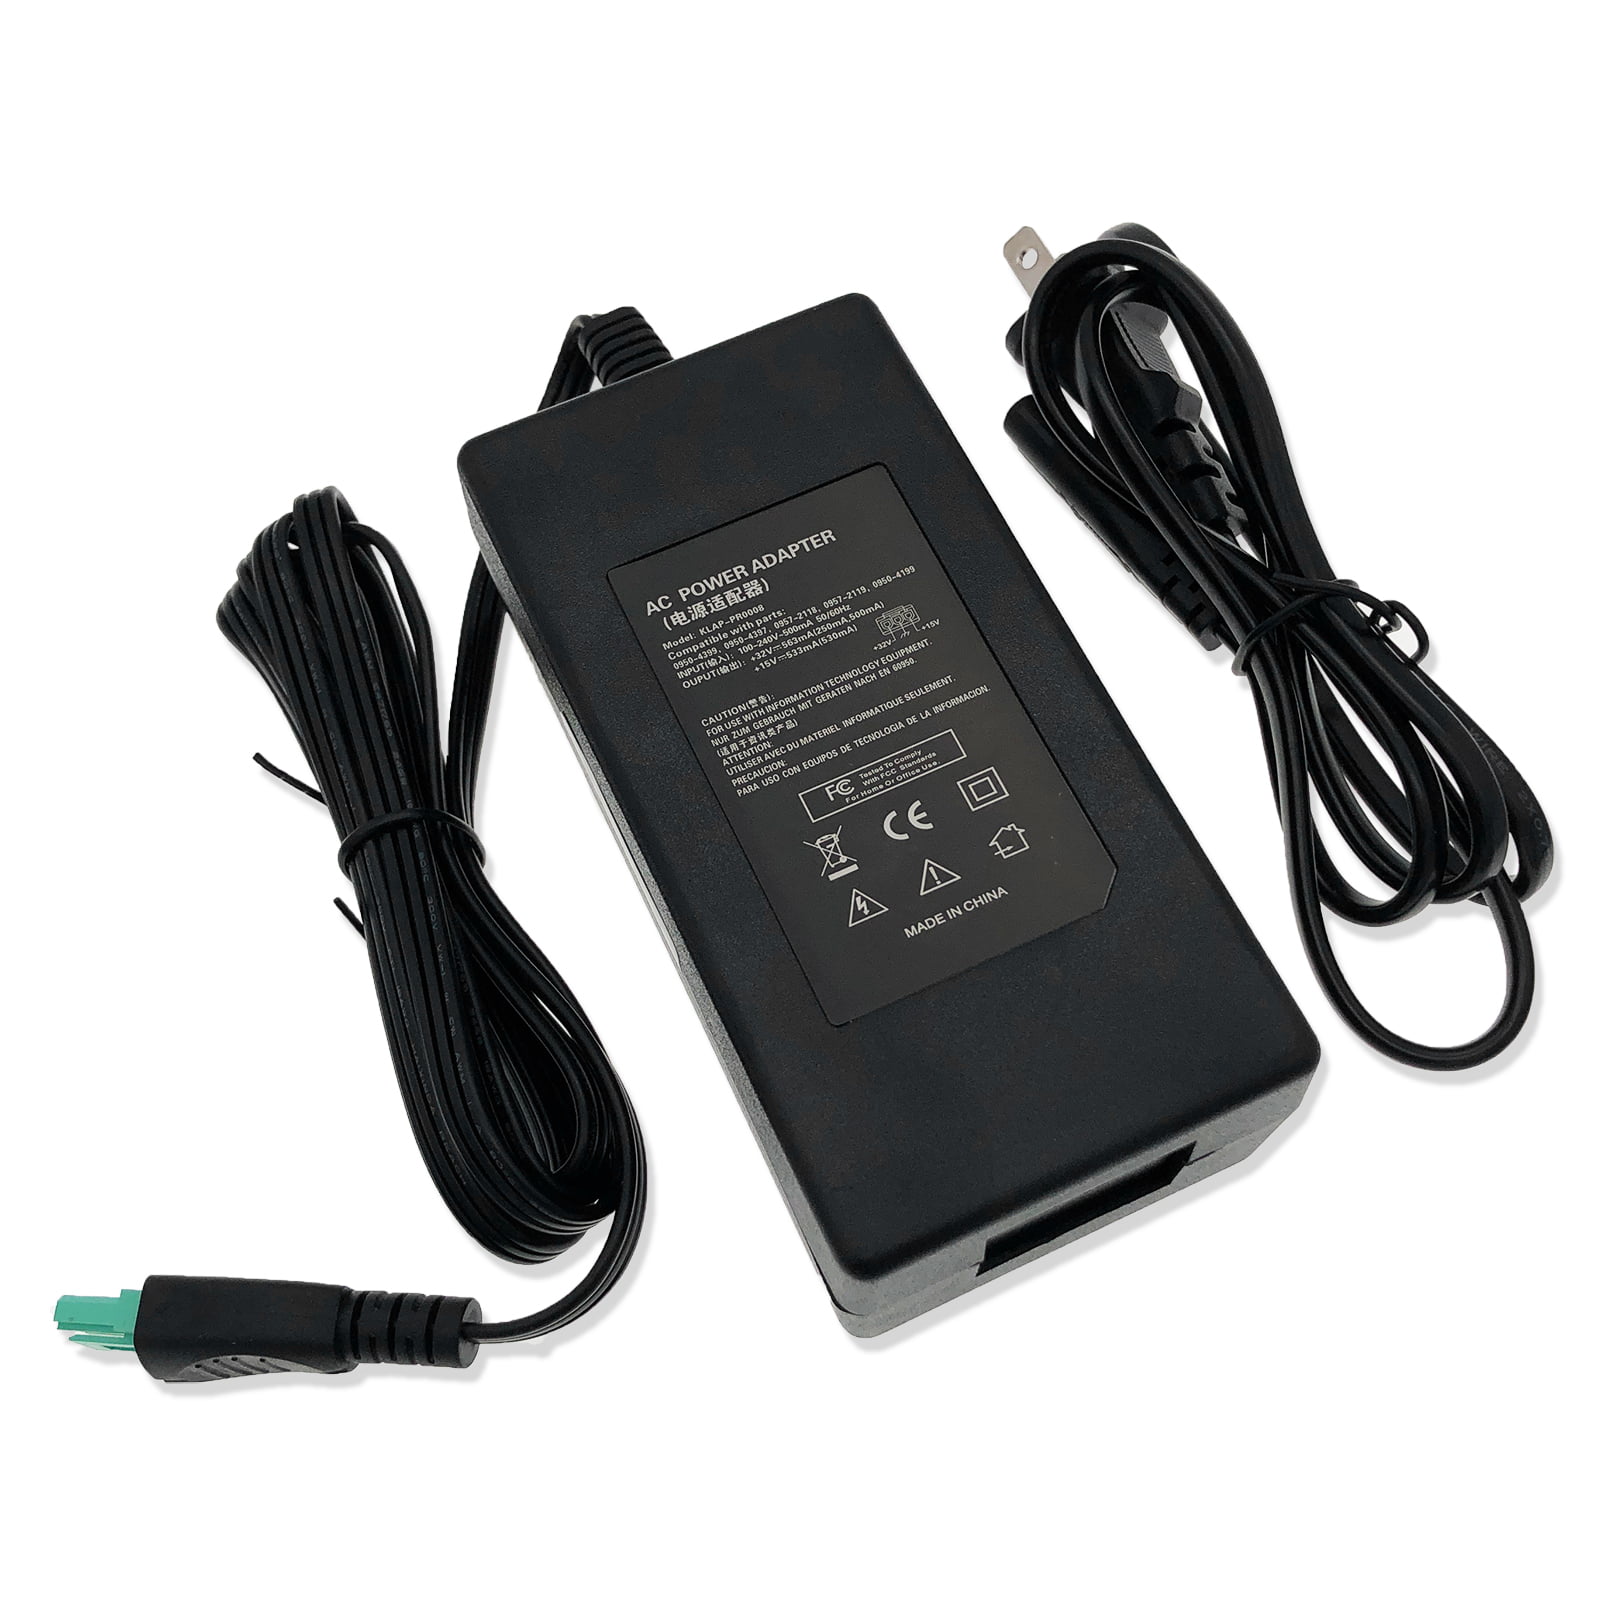 AC Power Supply Adapter Cord For HP Deskjet 2512 2514 3000 3050 3050A Printer 